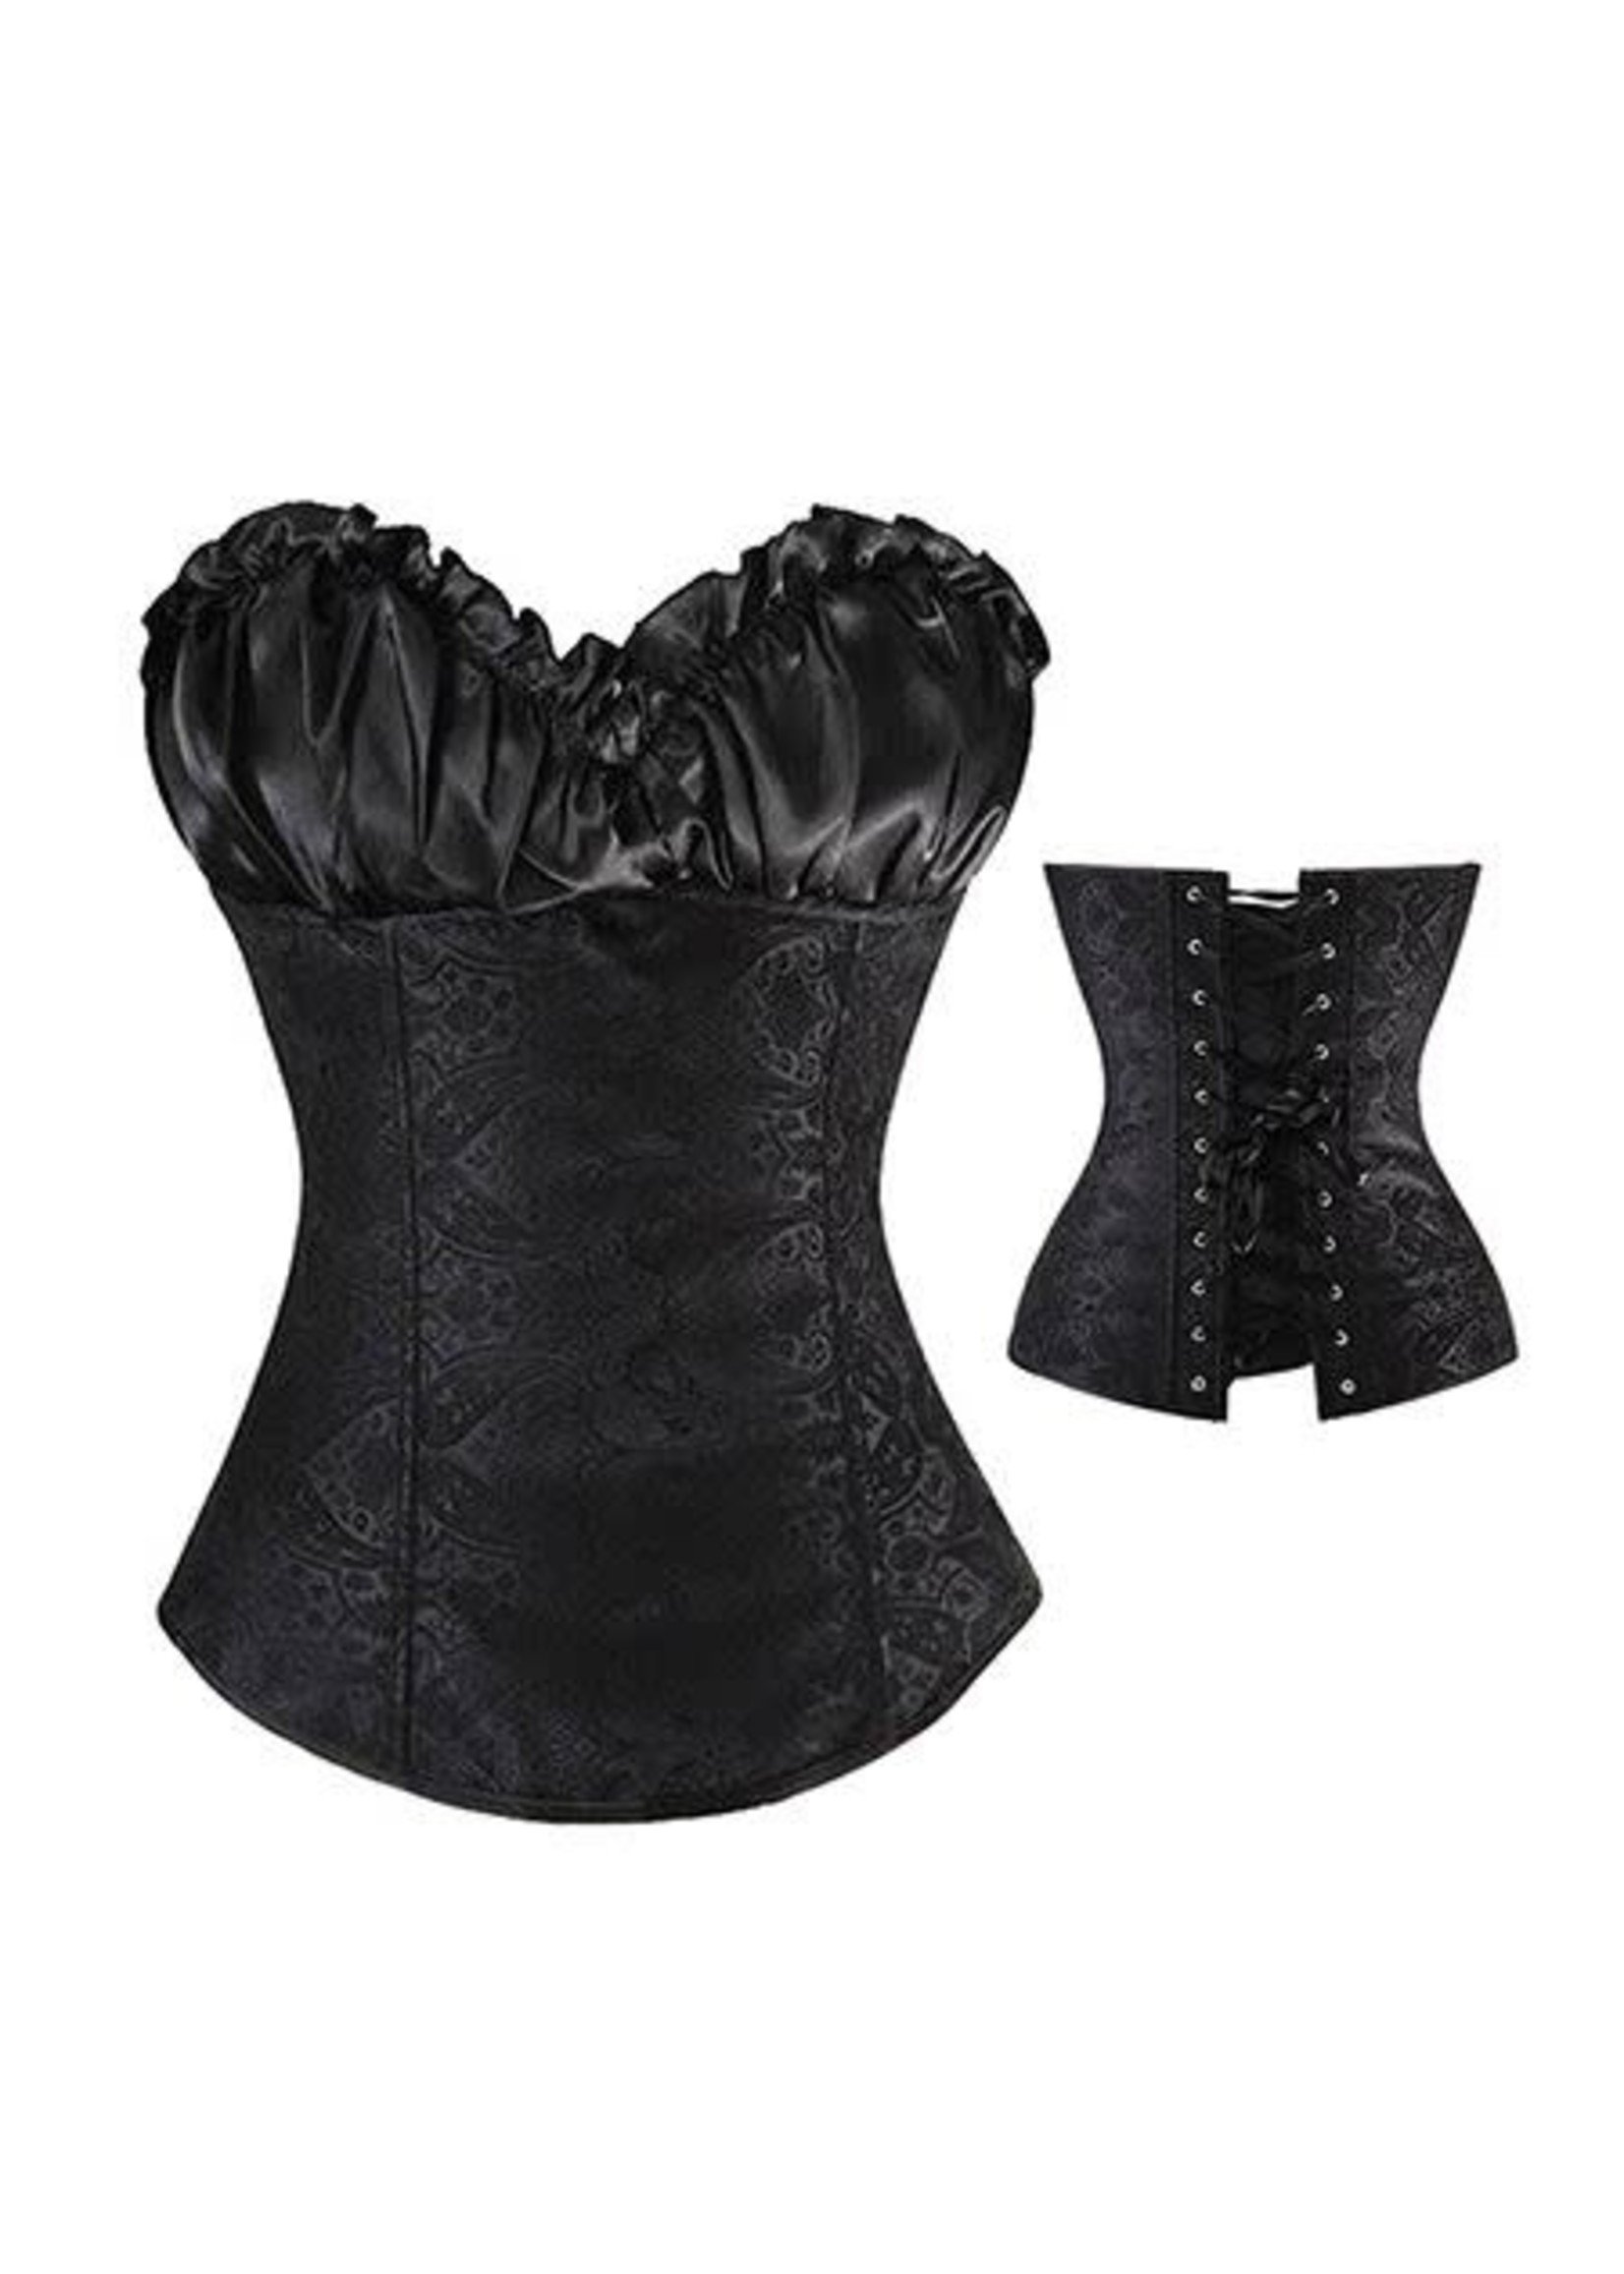 Generic Miss Moly Steampunk Corset Gothic Bustier Boned Overbust Dress  Underbust Burlesque Plus Size 6xl Tummy Slimming Clothes